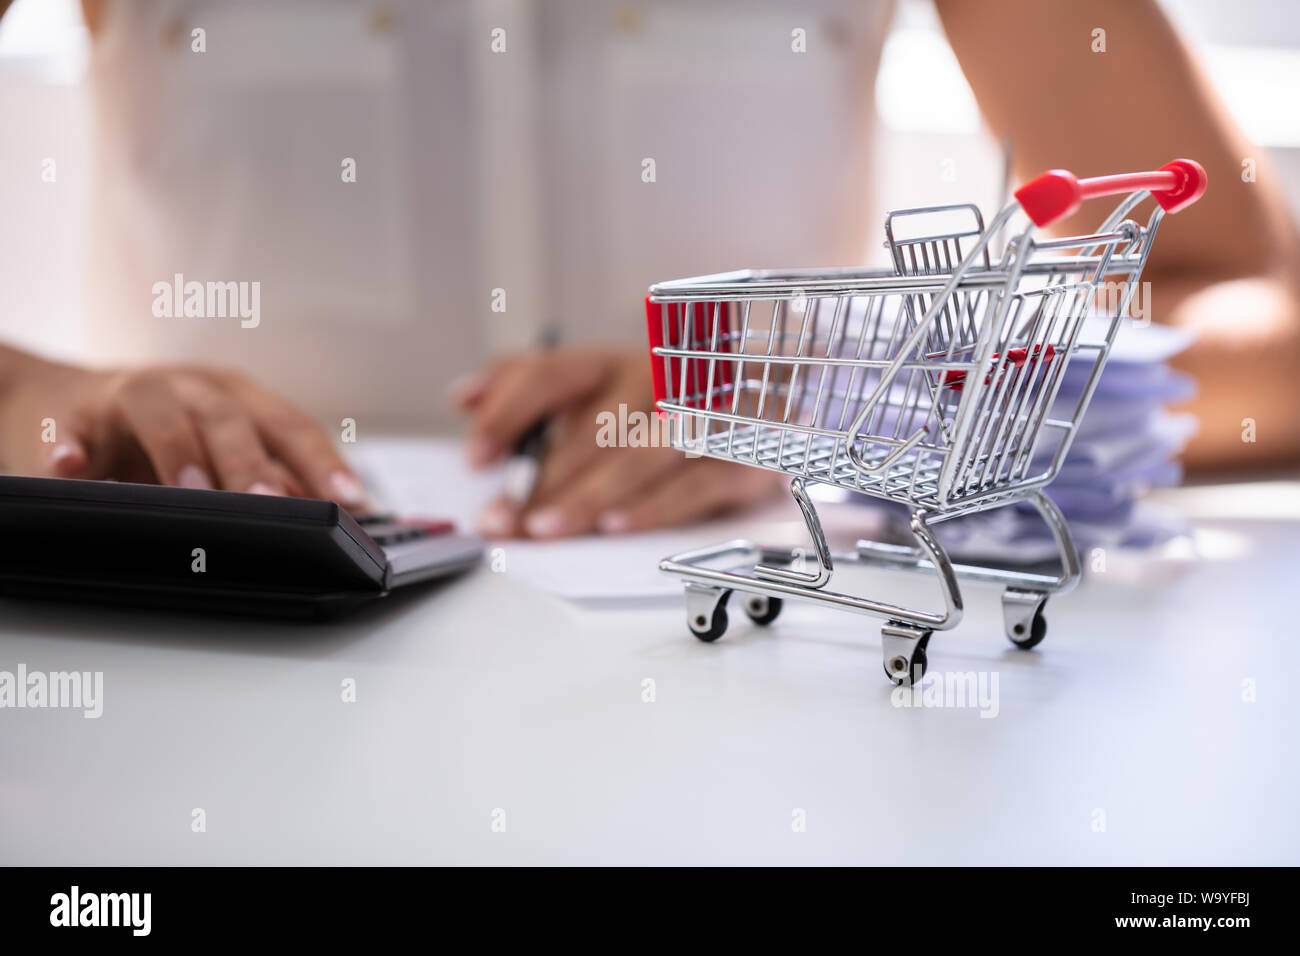 Close-up Of Person Calculating Bill With Calculator Near Shopping Cart On Desk Stock Photo